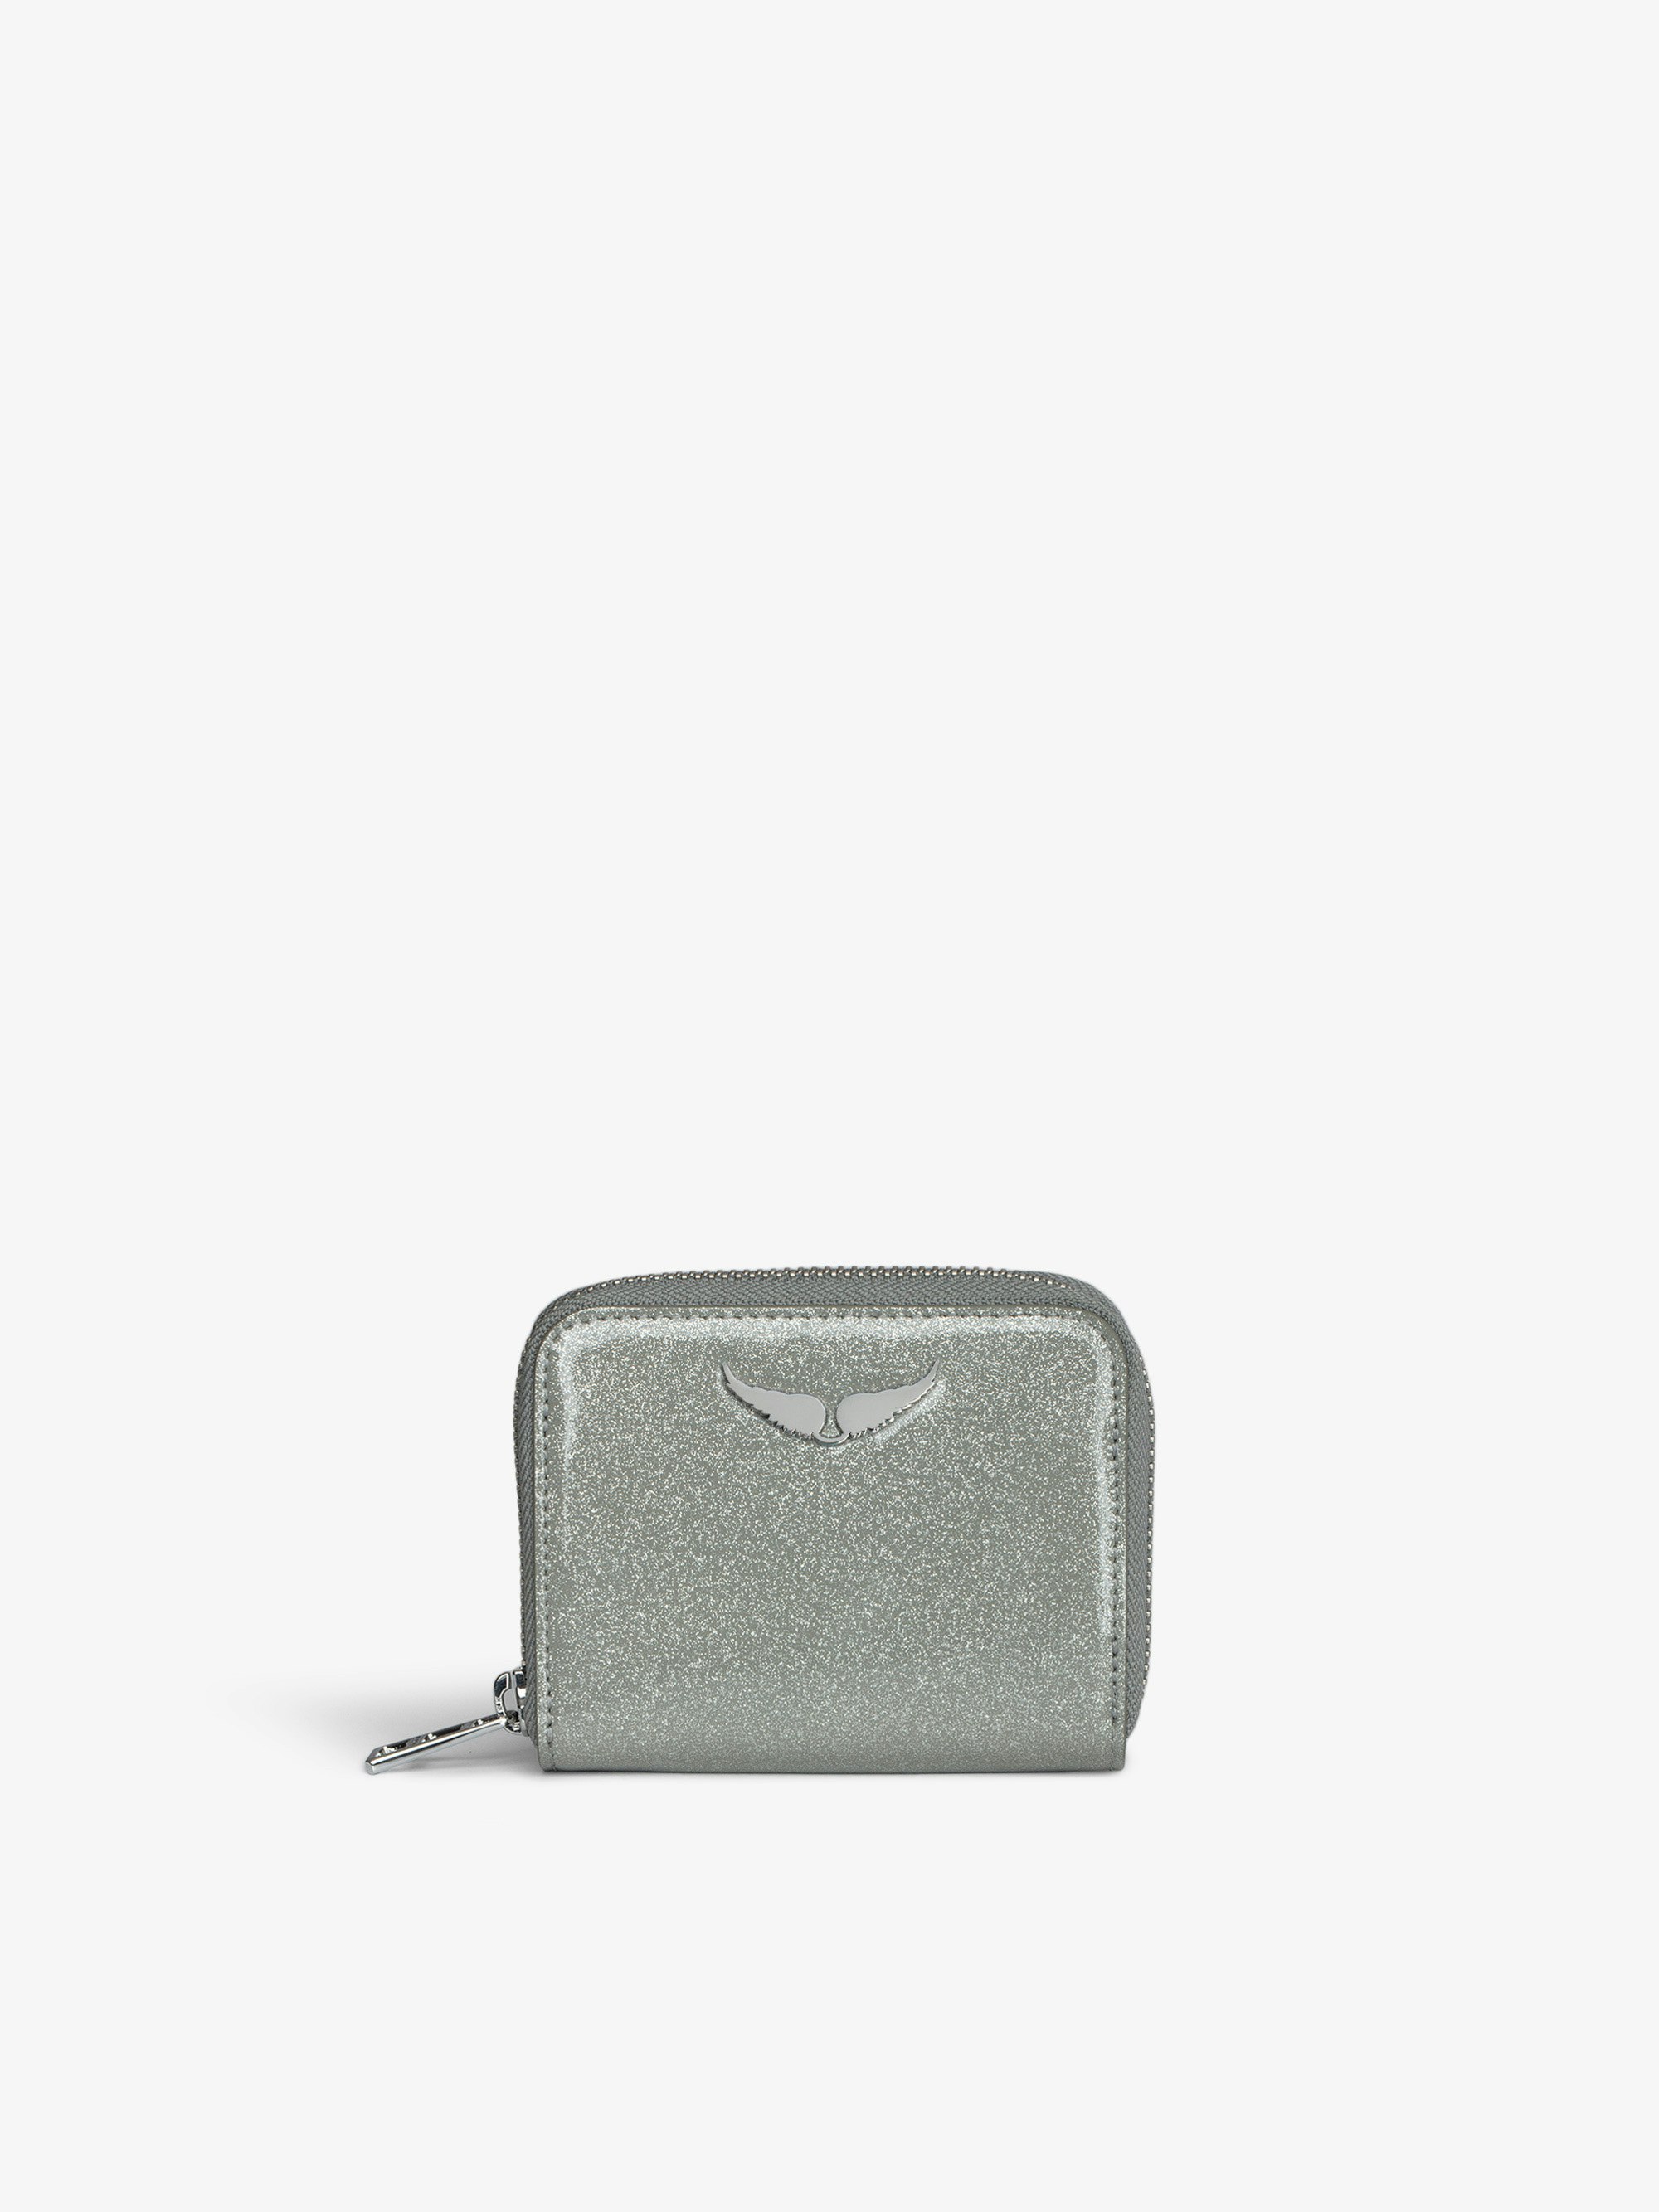 Mini ZV Infinity Patent Coin Purse - Silver glitter patent leather wallet with wings charm.